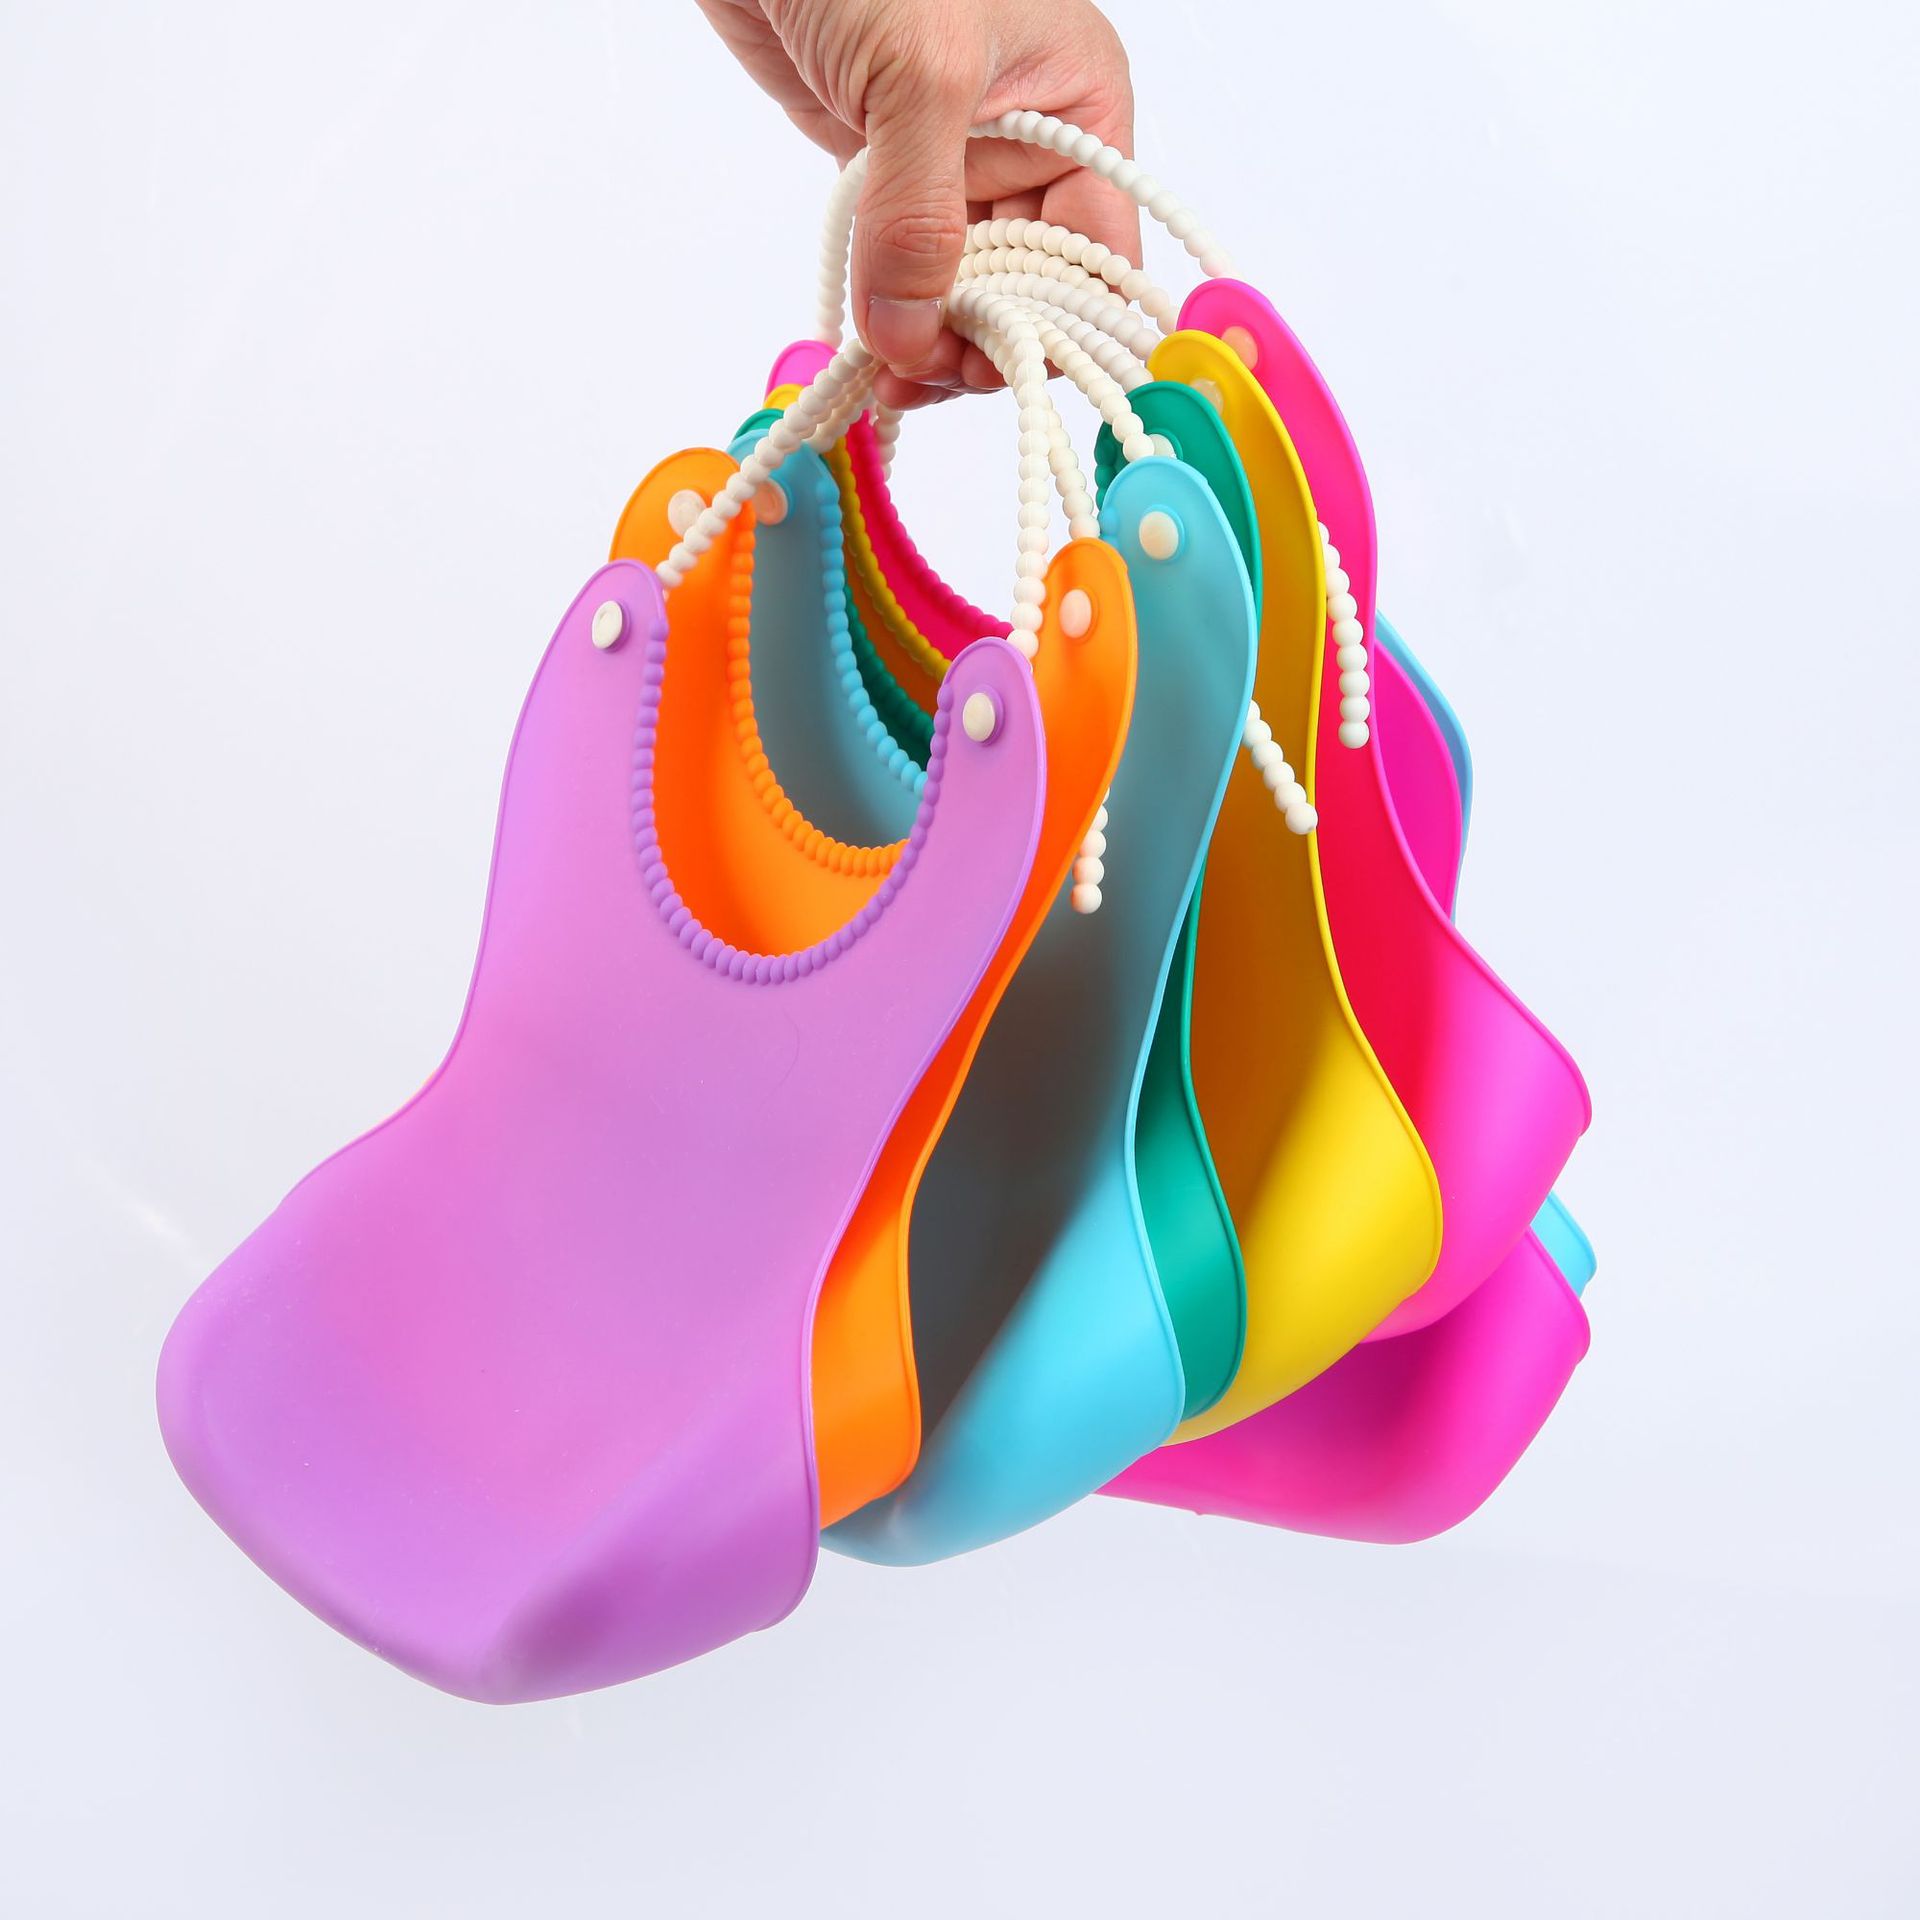 Waterproof Silicone Baby Bib with Food Catcher